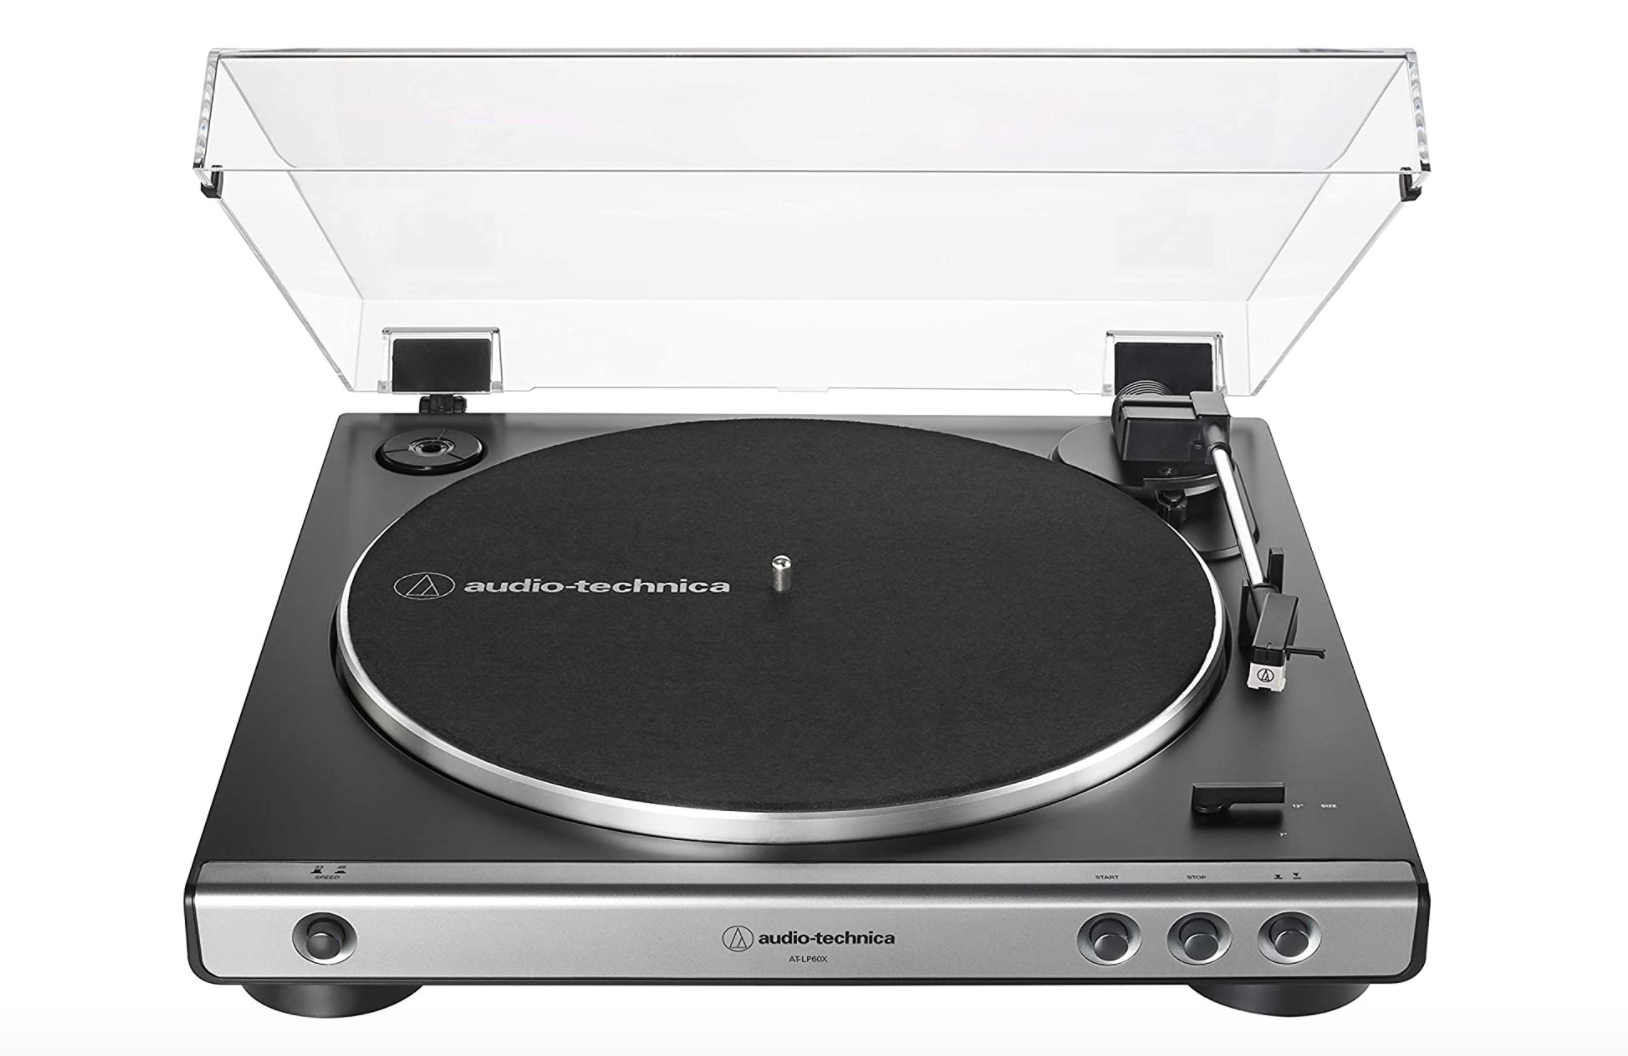 Audio-Technica Turntable from Turntable Kitchen's Best Turntables of 2022 list